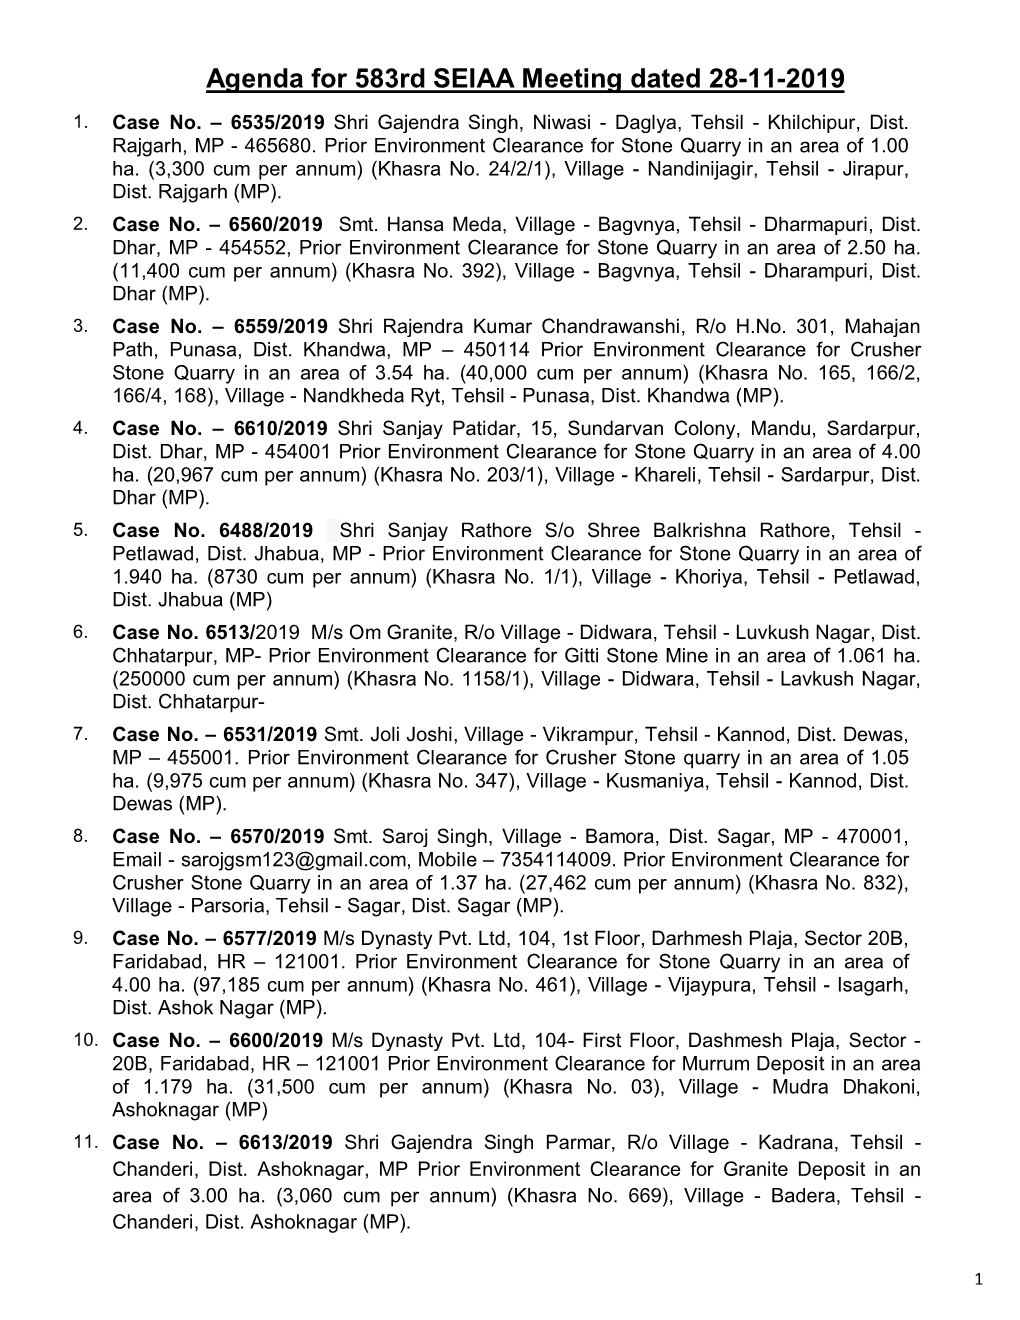 Agenda for 583Rd SEIAA Meeting Dated 28-11-2019